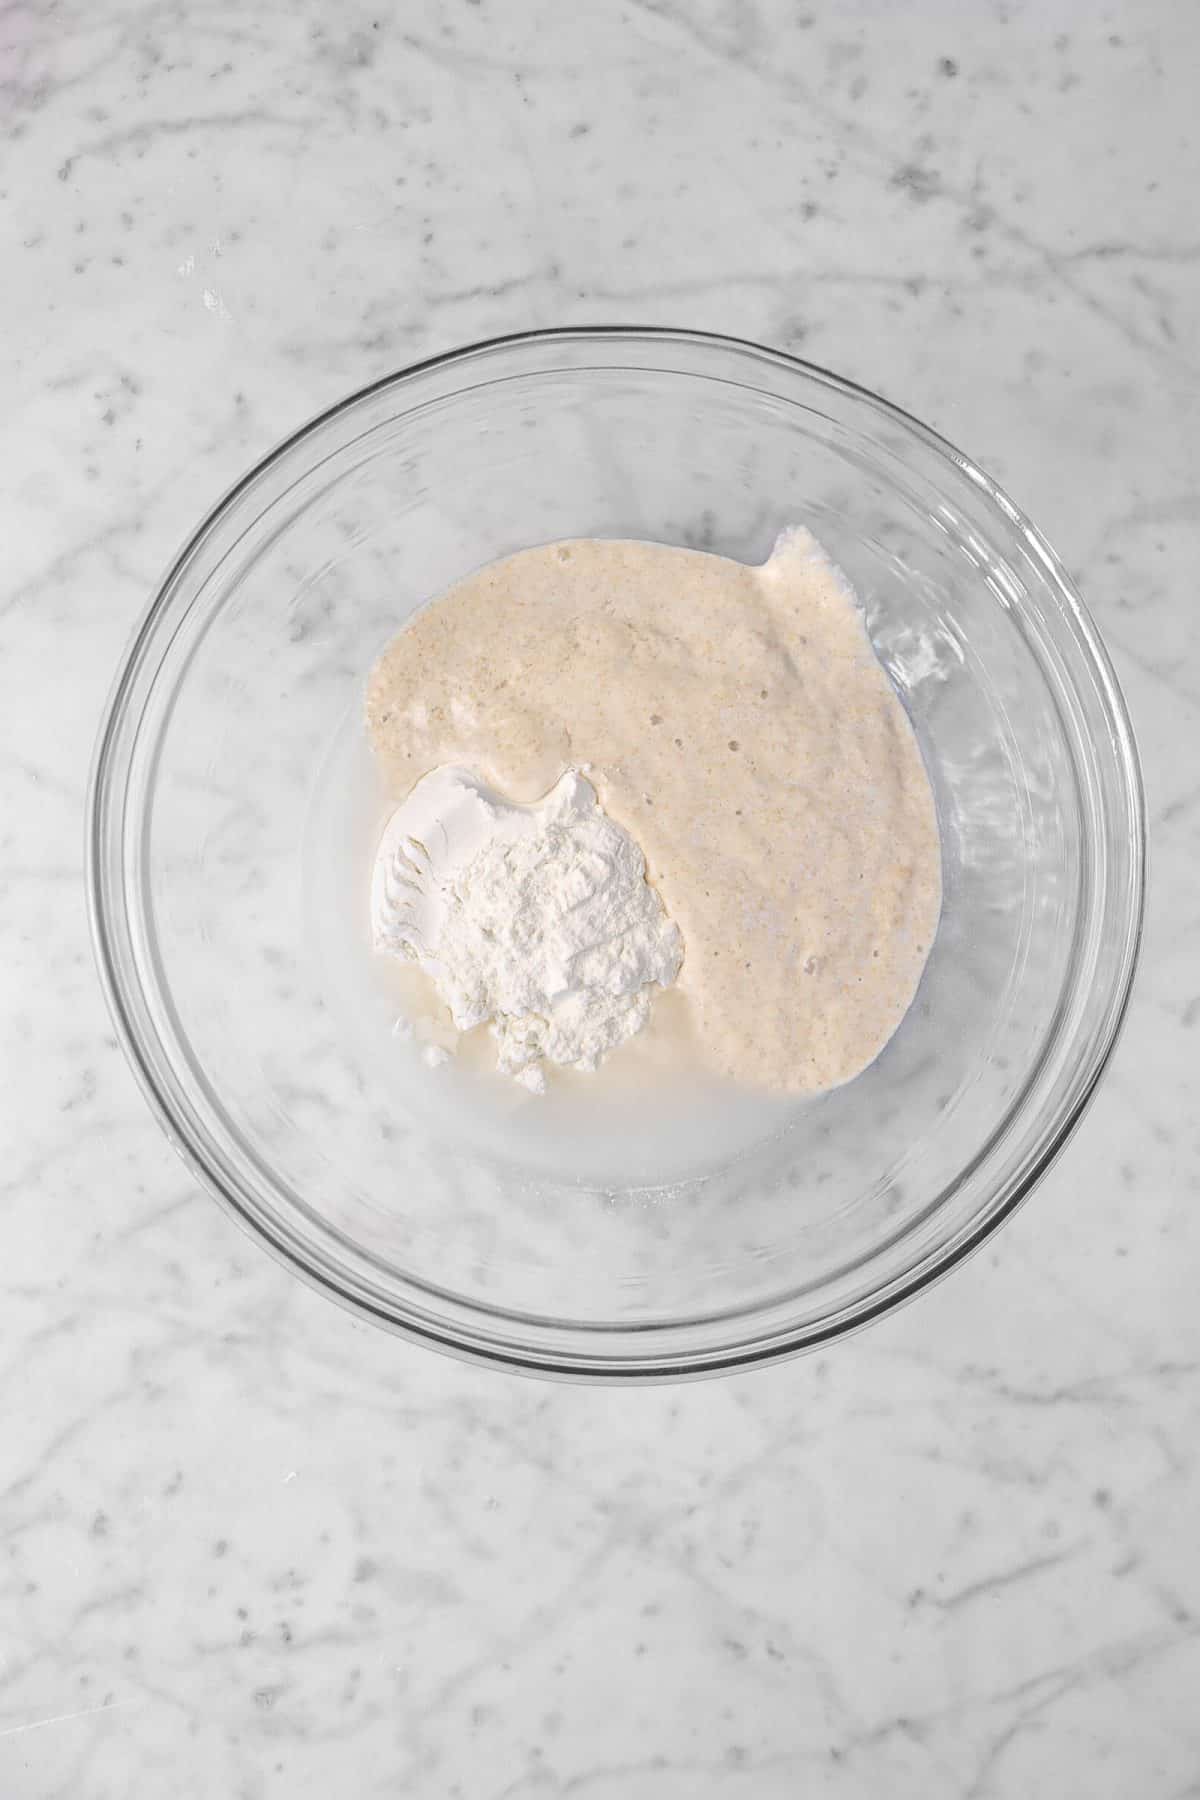 flour, sourdough starter, and water in a glass bowl